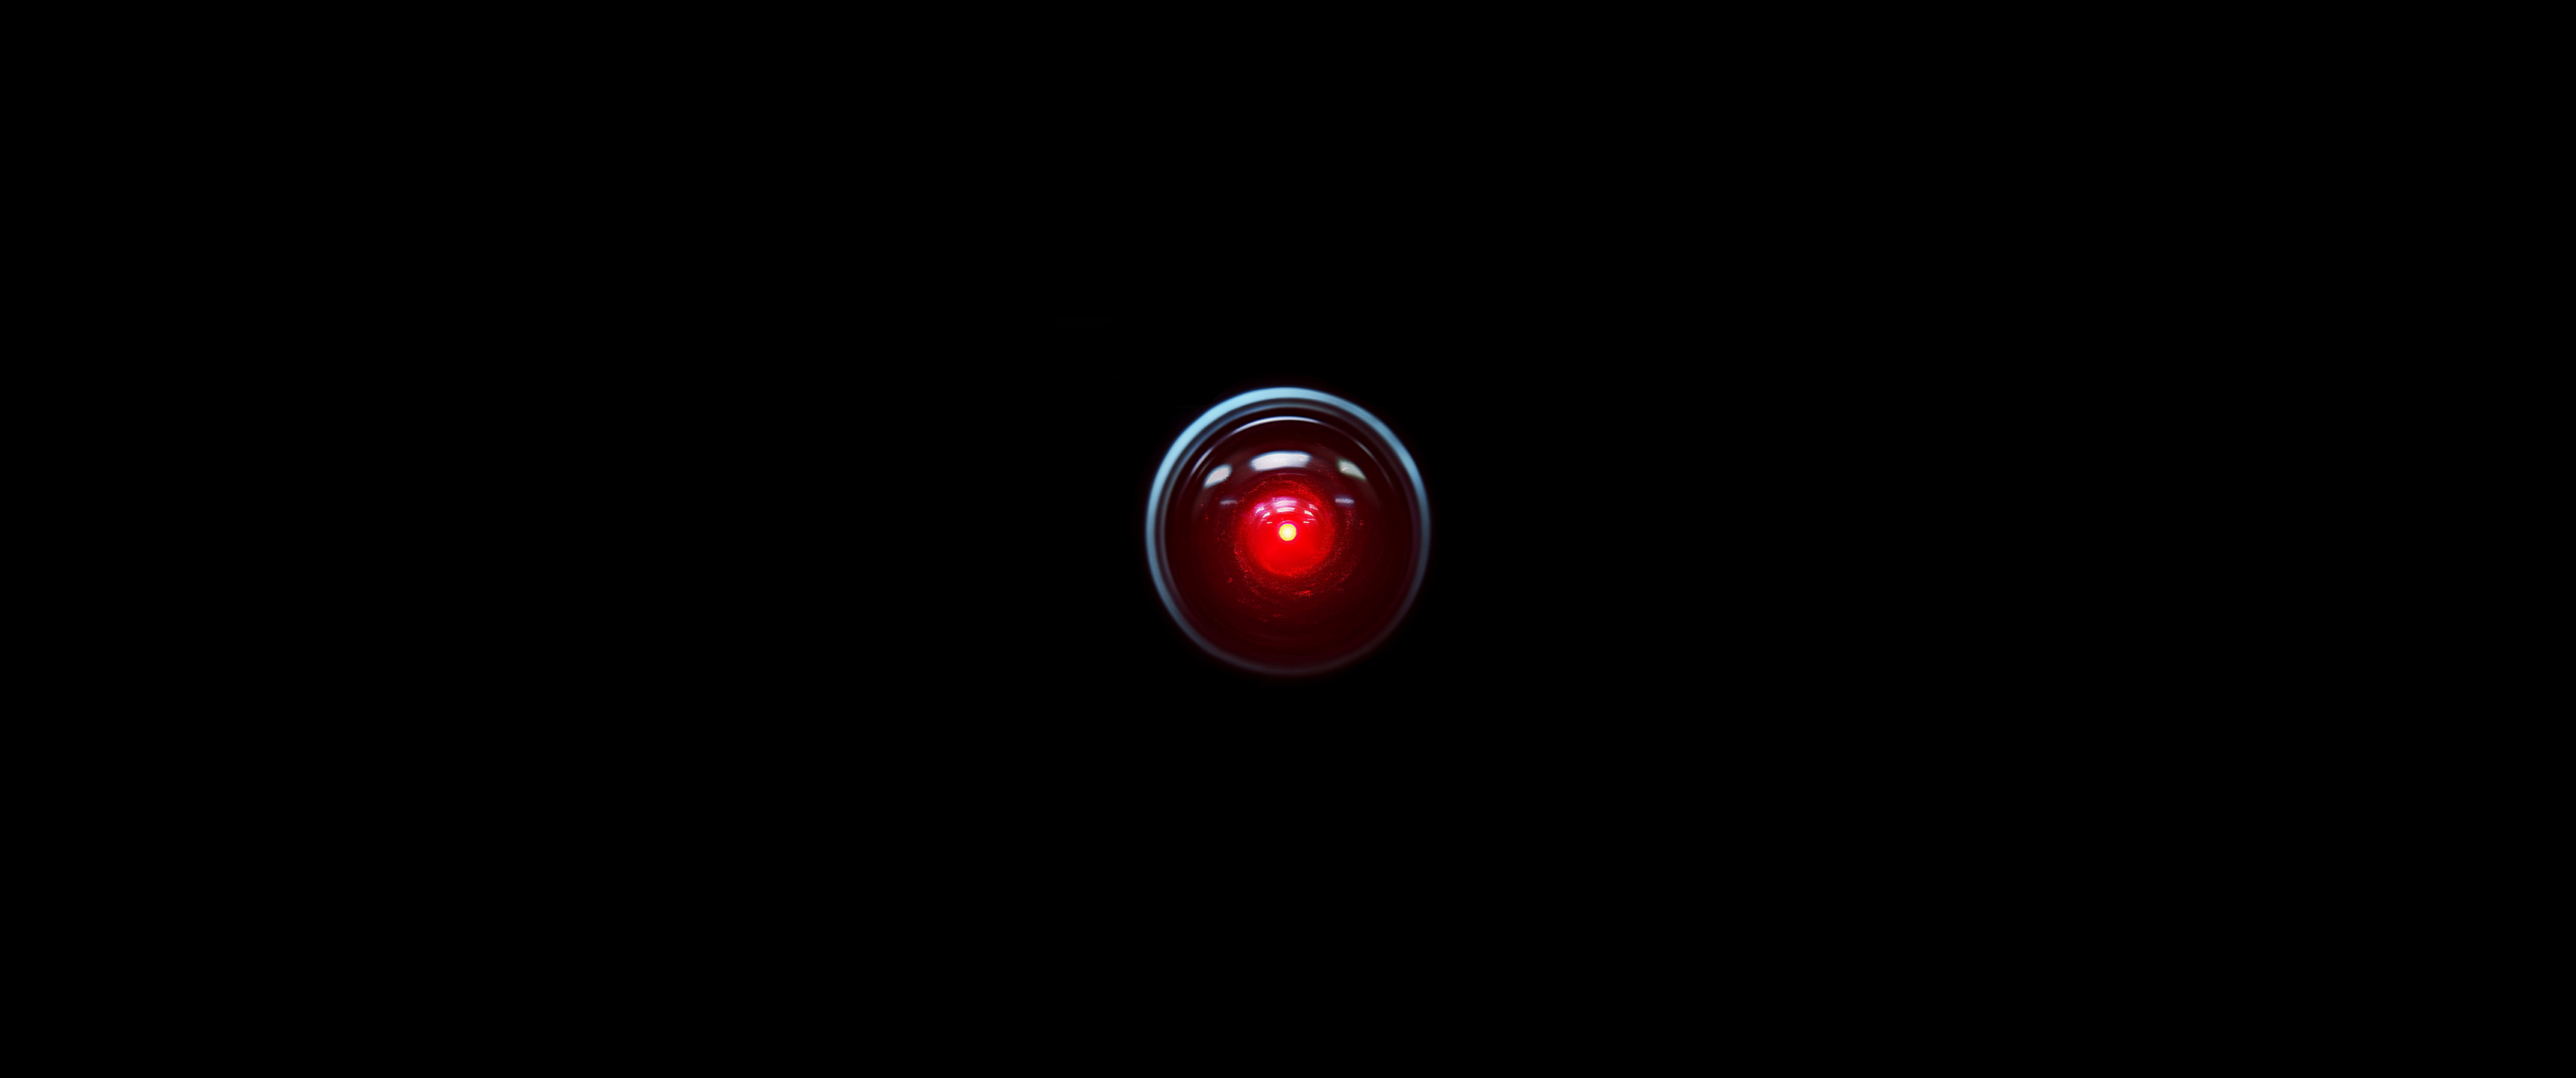 Computer Technology Black Background HAL 9000 Minimalism Simple Background 2001 A Space Odyssey 3440x1440